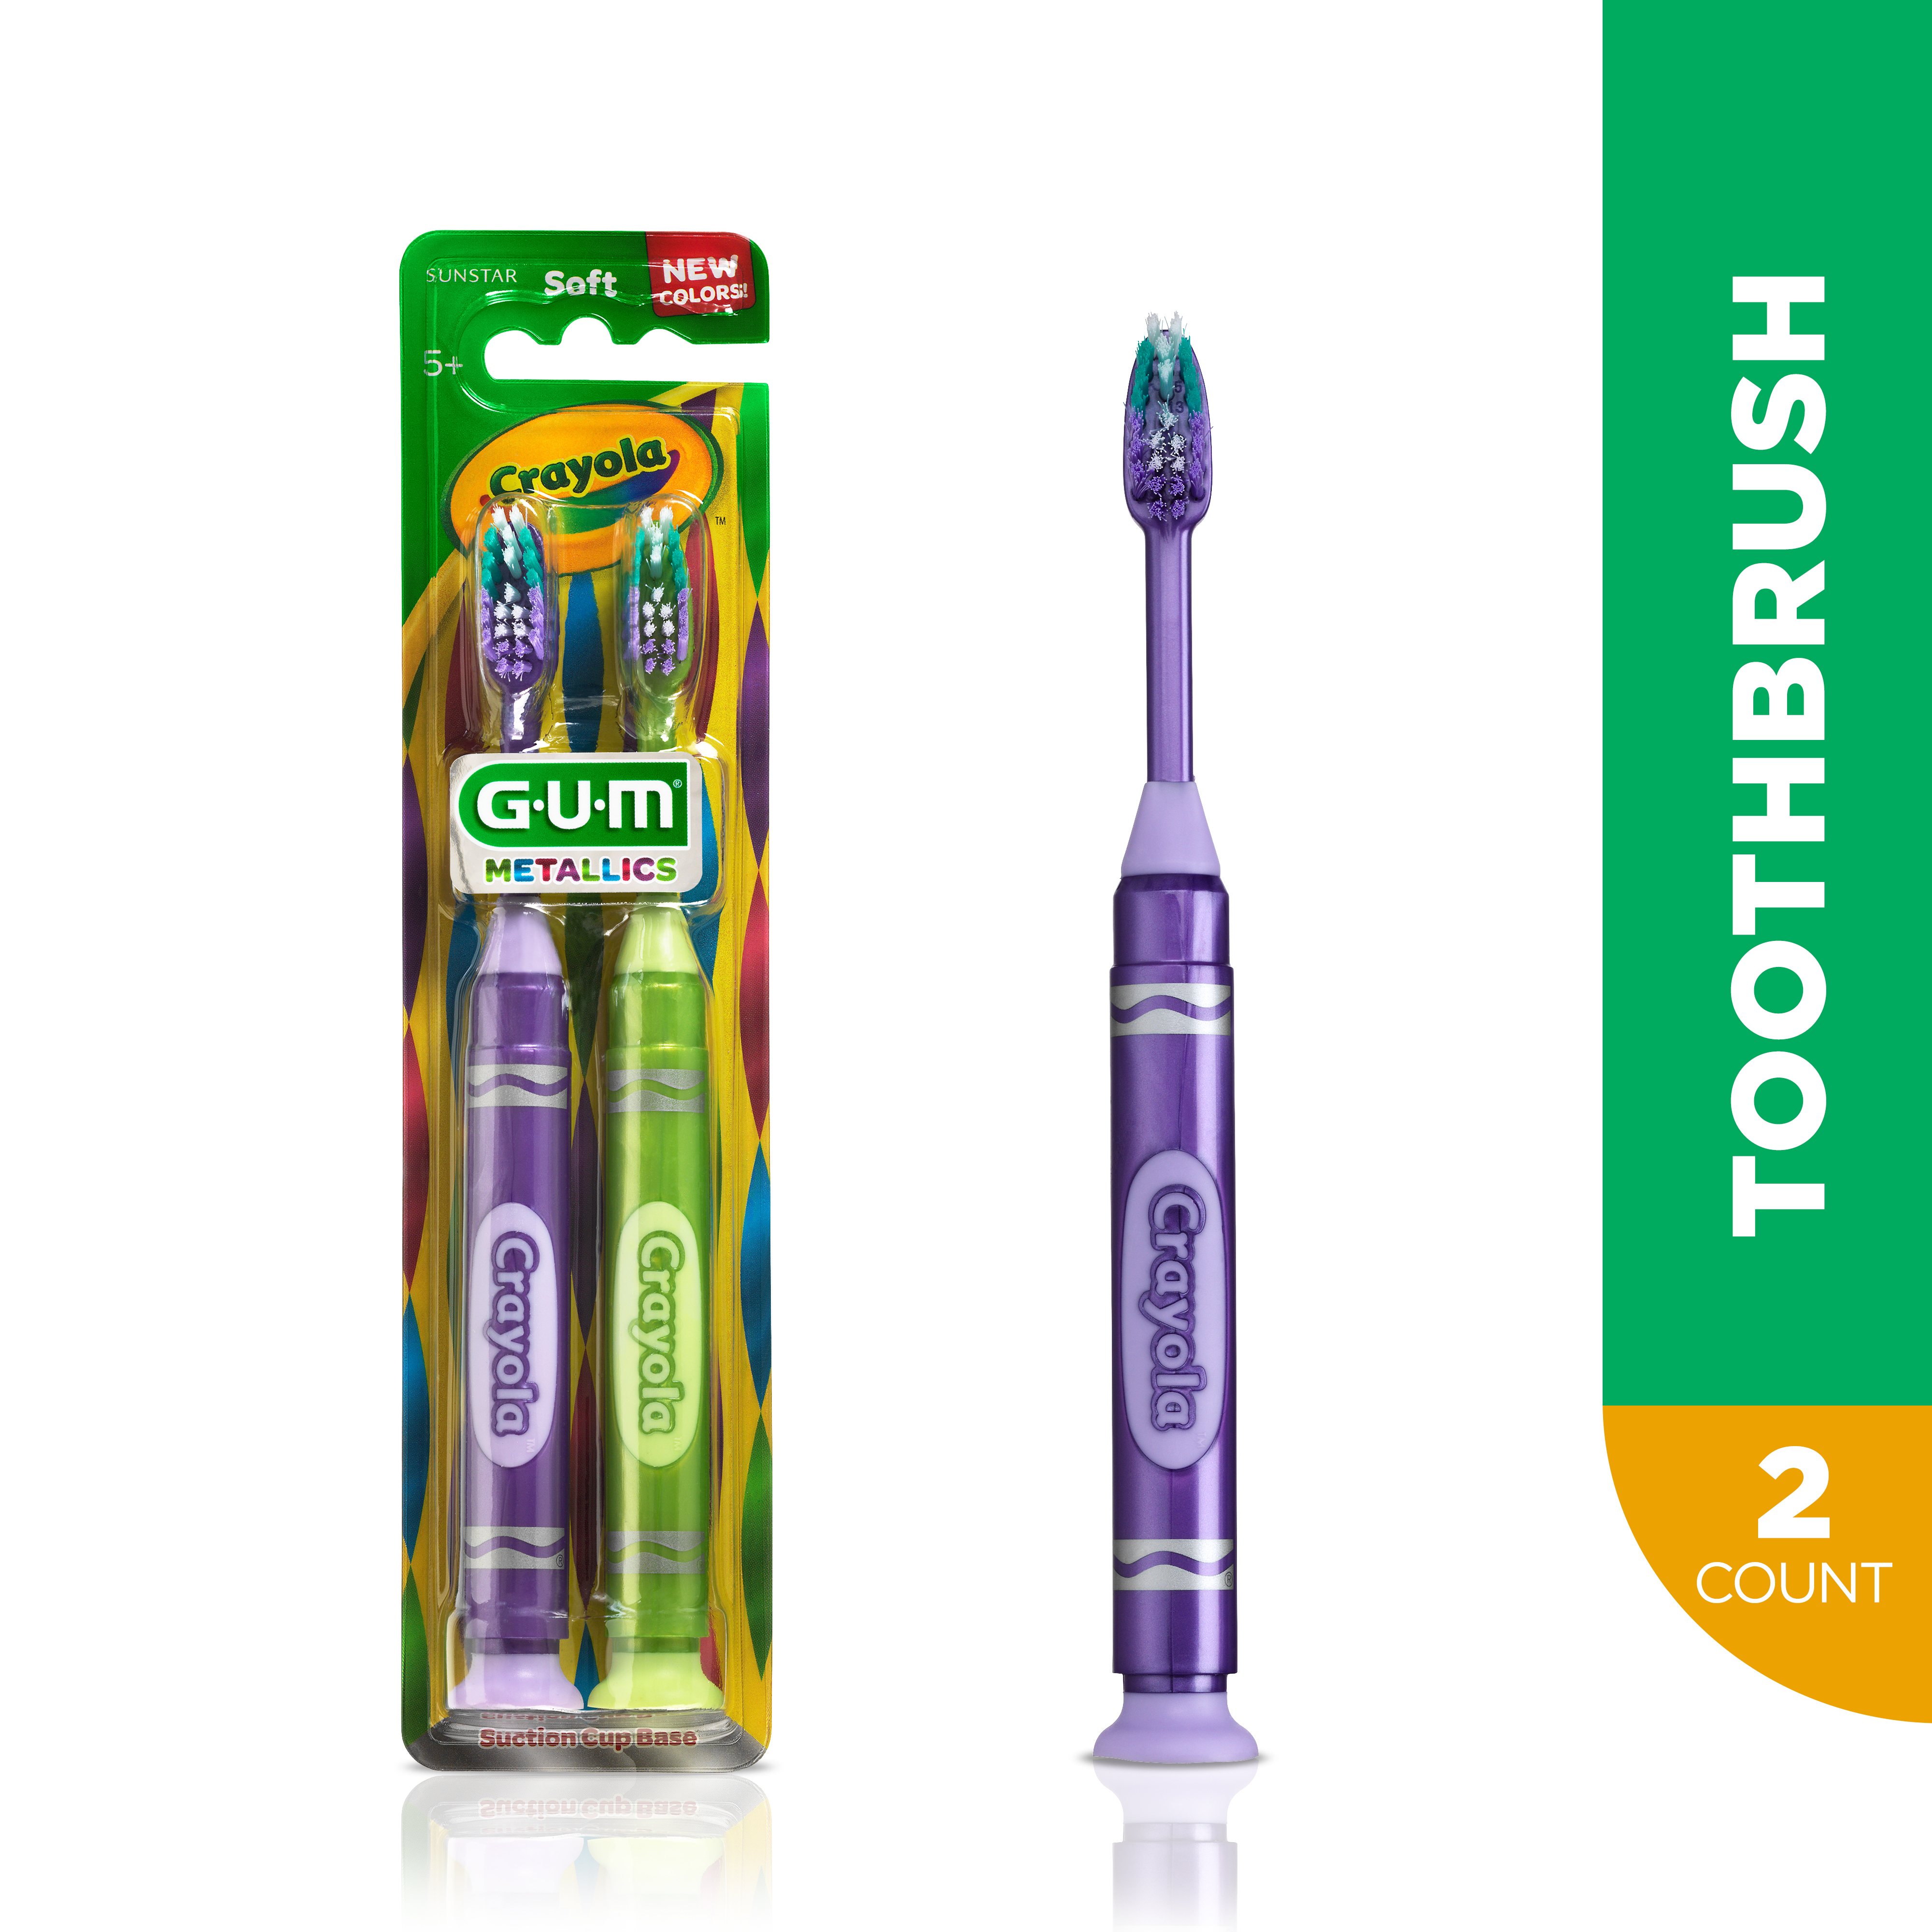 GUM Crayola Suction Cup Base Toothbrush Soft - 2 CT - image 1 of 5